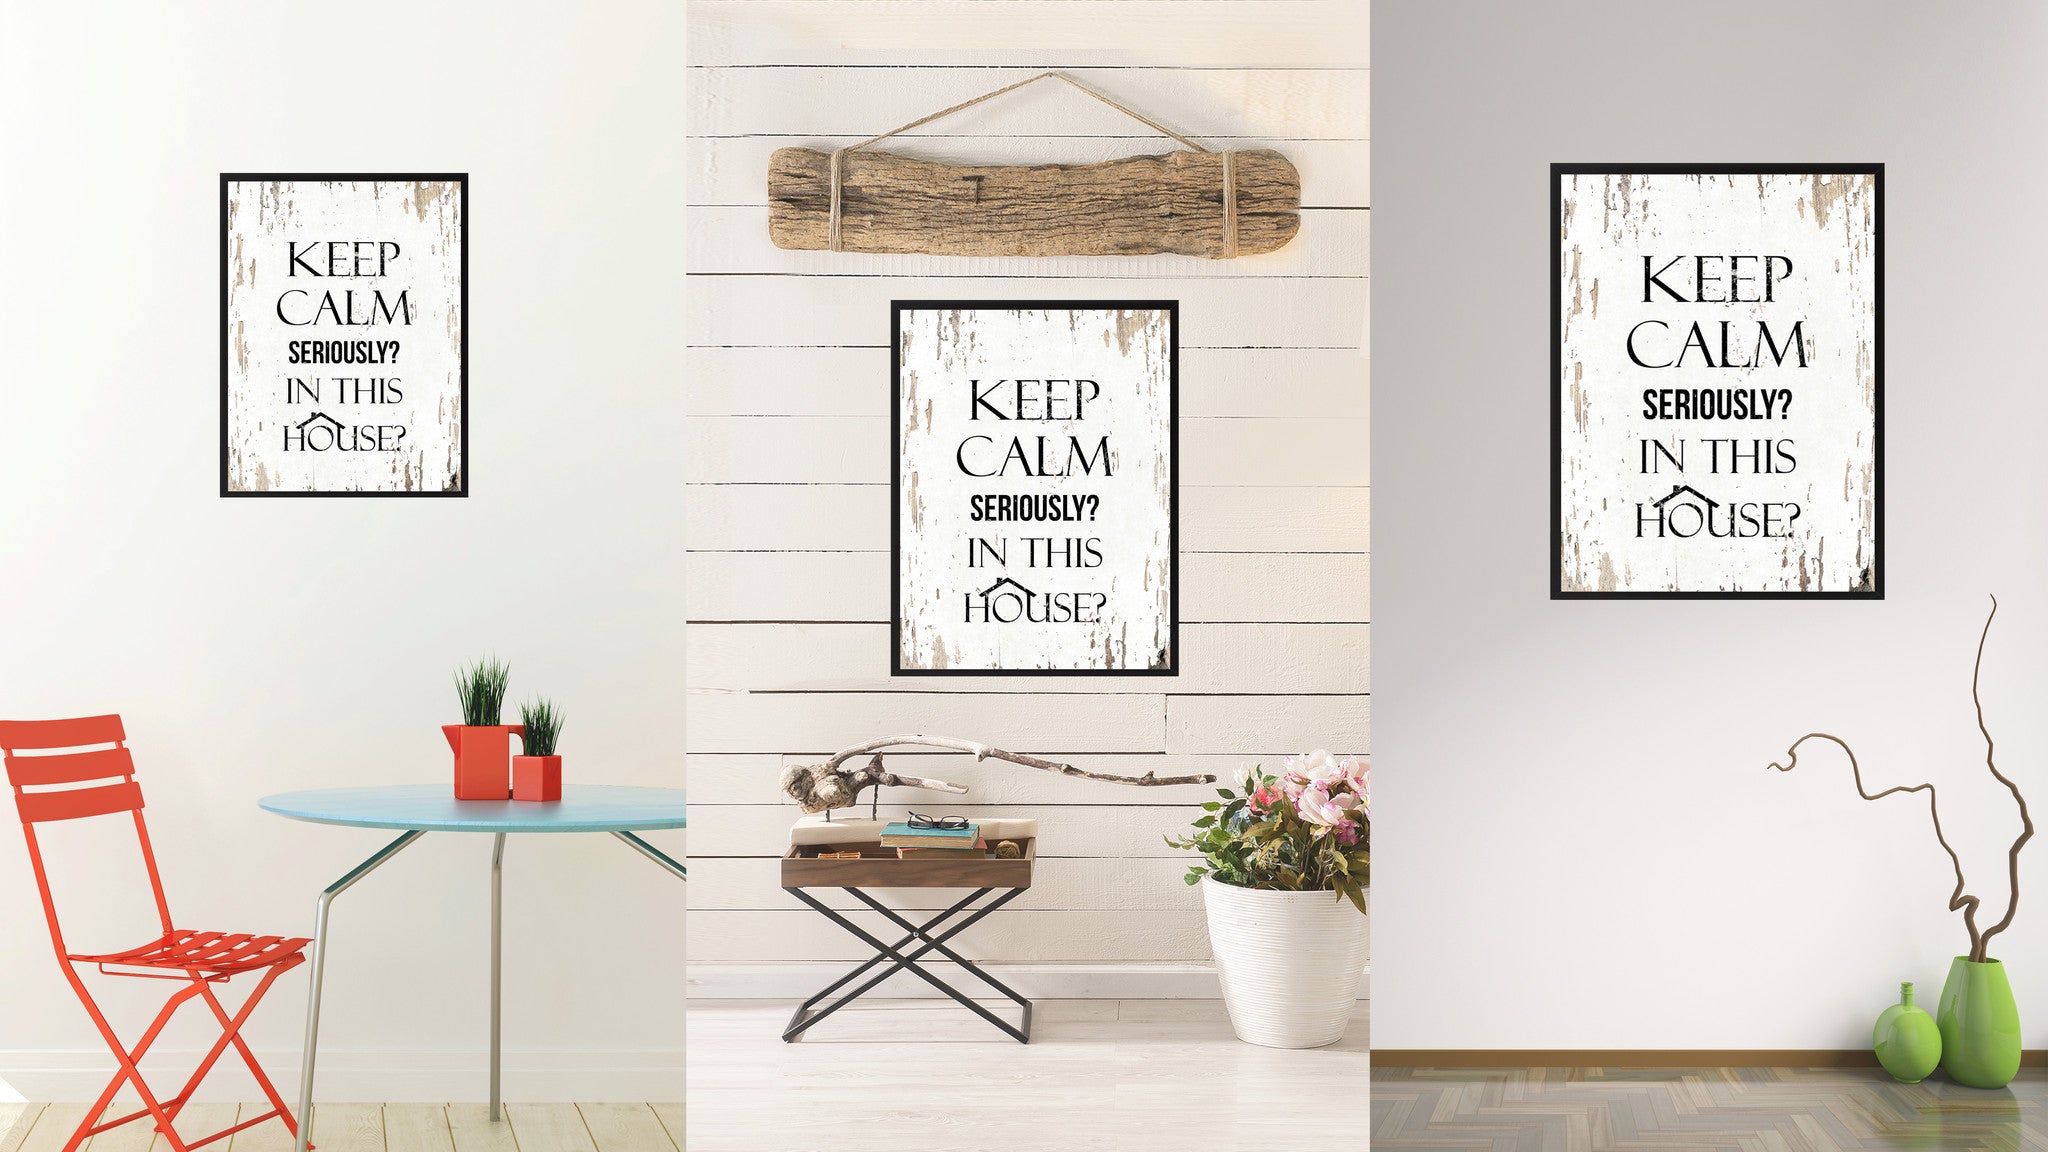 Keep calm seriously in this house Funny Quote Saying Gift Ideas Home Decor Wall Art